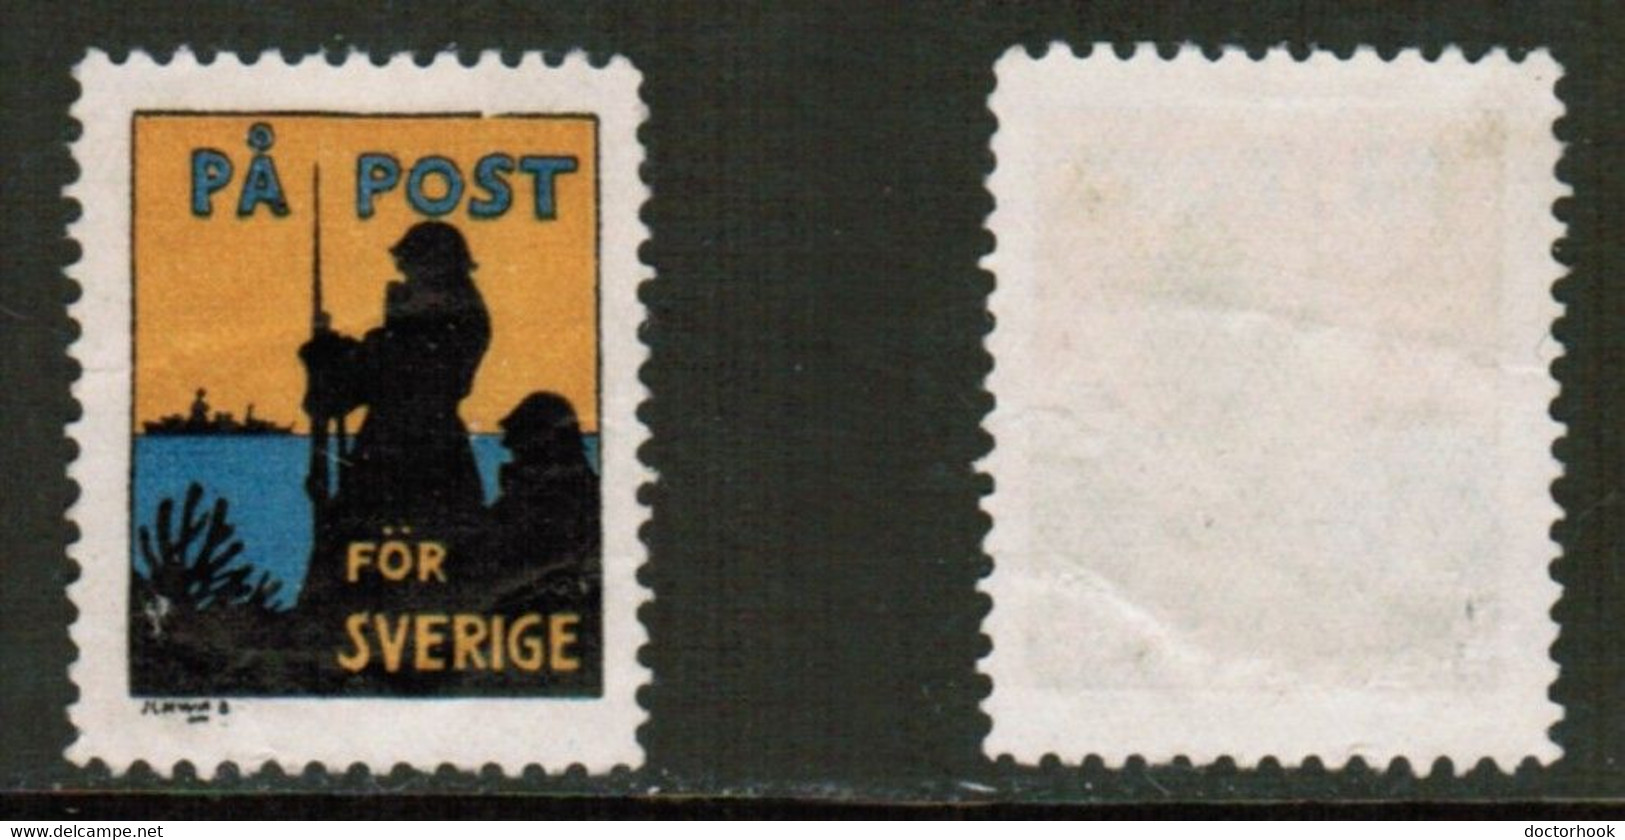 SWEDEN   UNLISTED MILITARY STAMP UNUSED (CONDITION AS PER SCAN) (Stamp Scan # 839-7) - Military